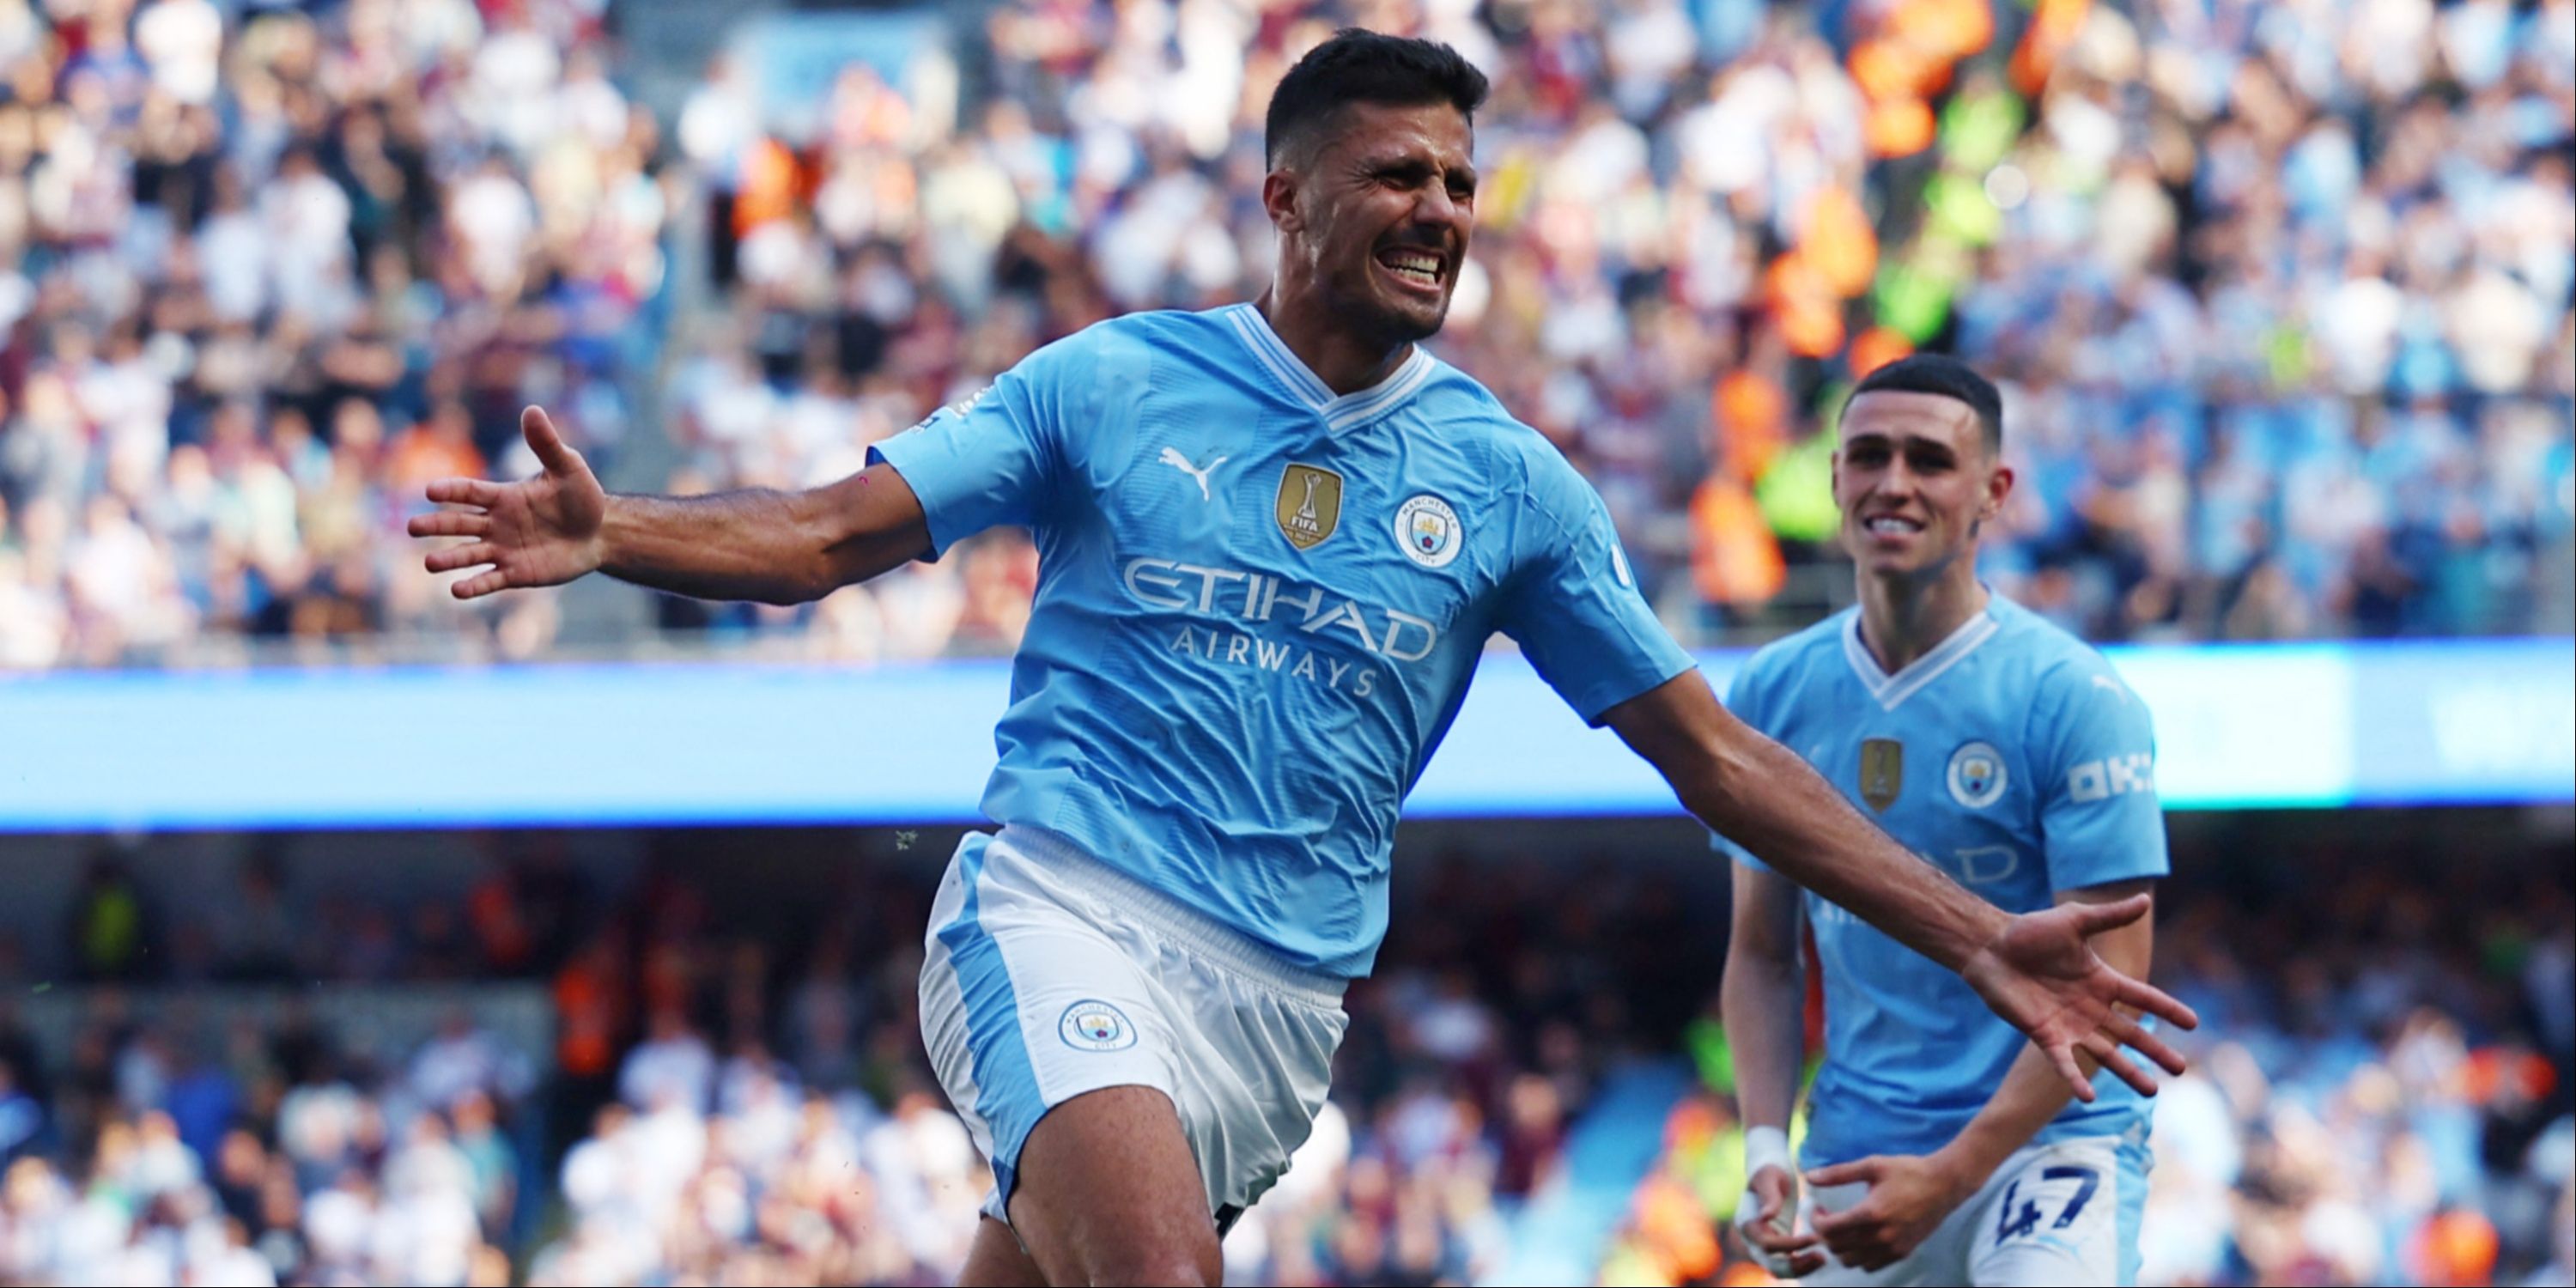 Man City 3-1 West Ham: Player Ratings and Match Highlights